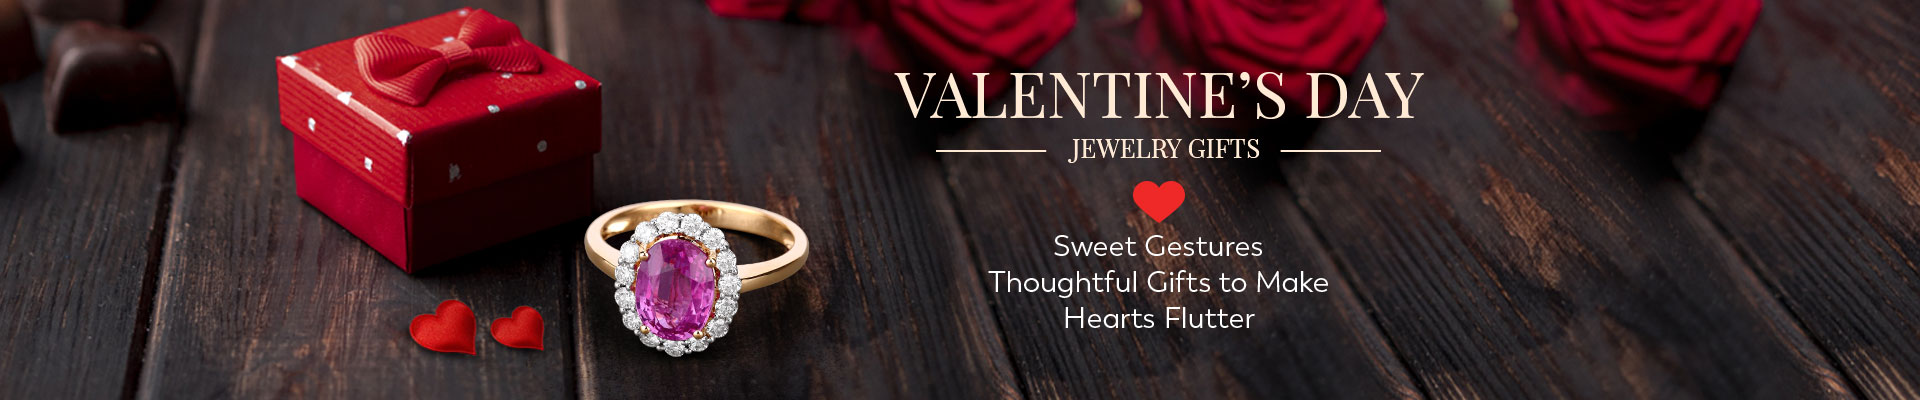 Valentine Days Jewelry Gifts, She's sure to love